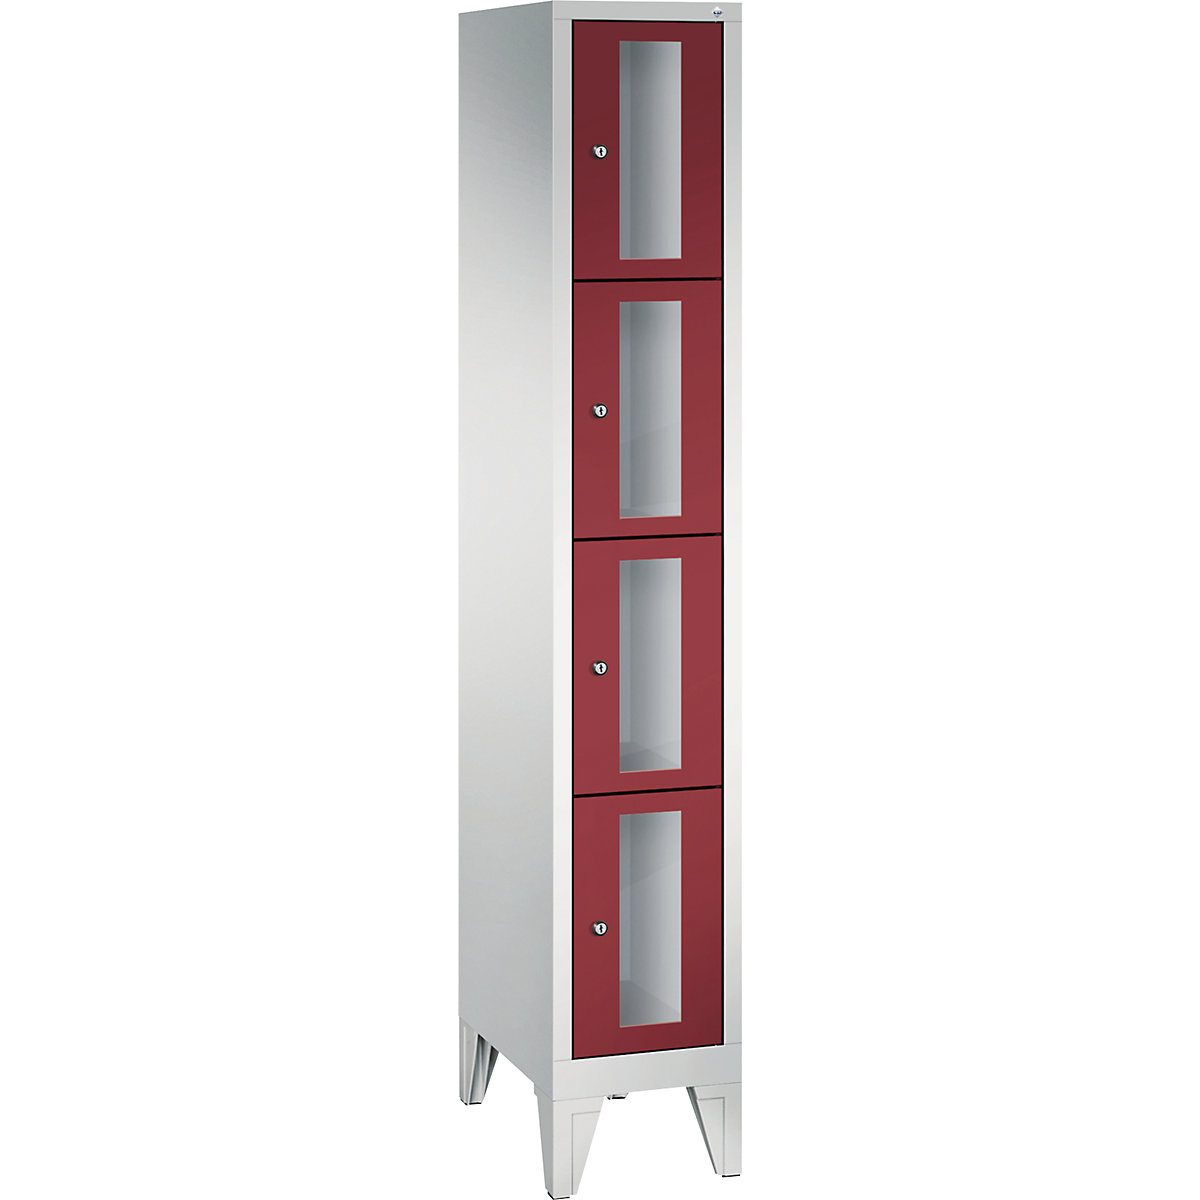 CLASSIC locker unit, compartment height 375 mm, with feet – C+P, 4 compartments, width 320 mm, ruby red door